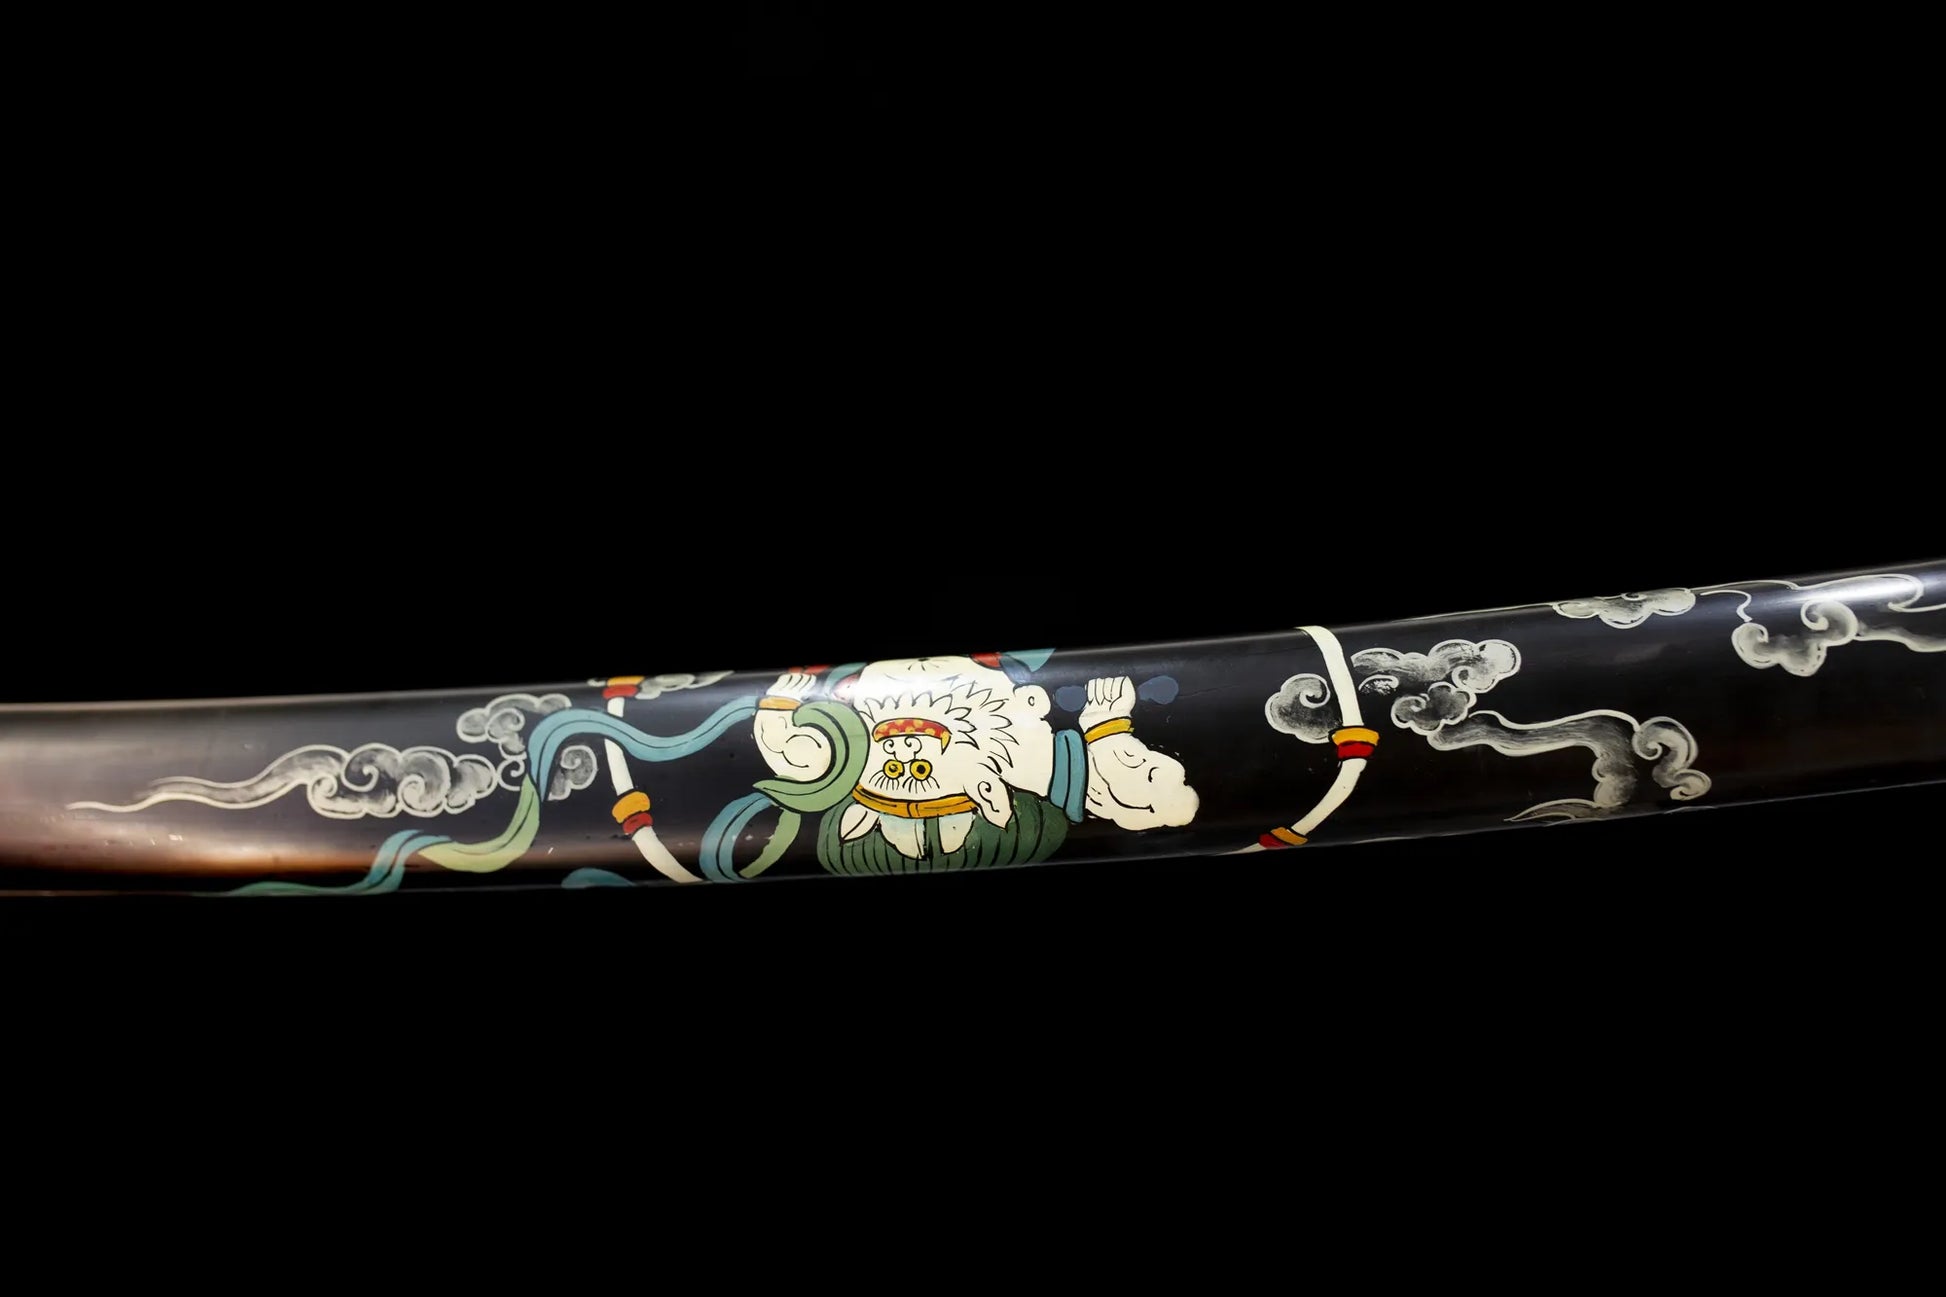 Hand-painted large paint sheath, current industrial paint cannot be compared to large paint at all